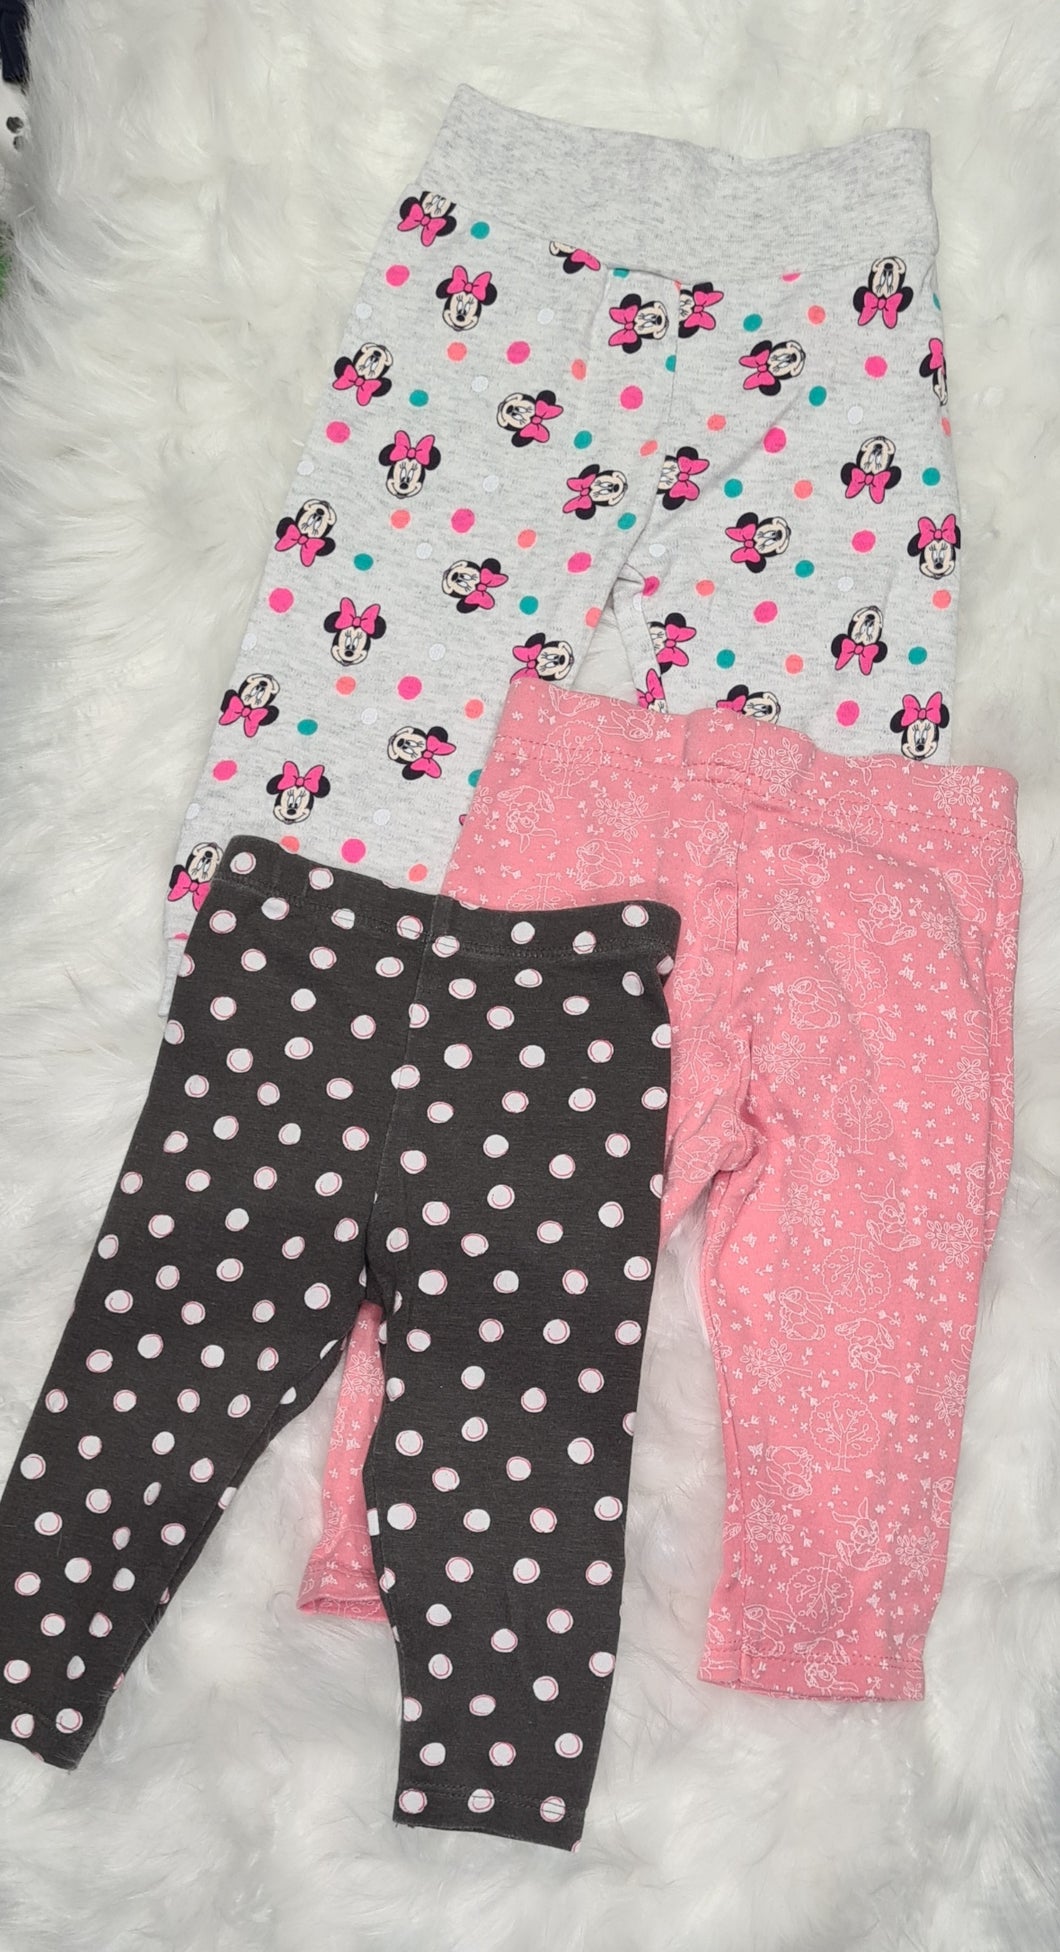 Girls 6-9 months - Set of 3 - Minnie Mouse Leggings